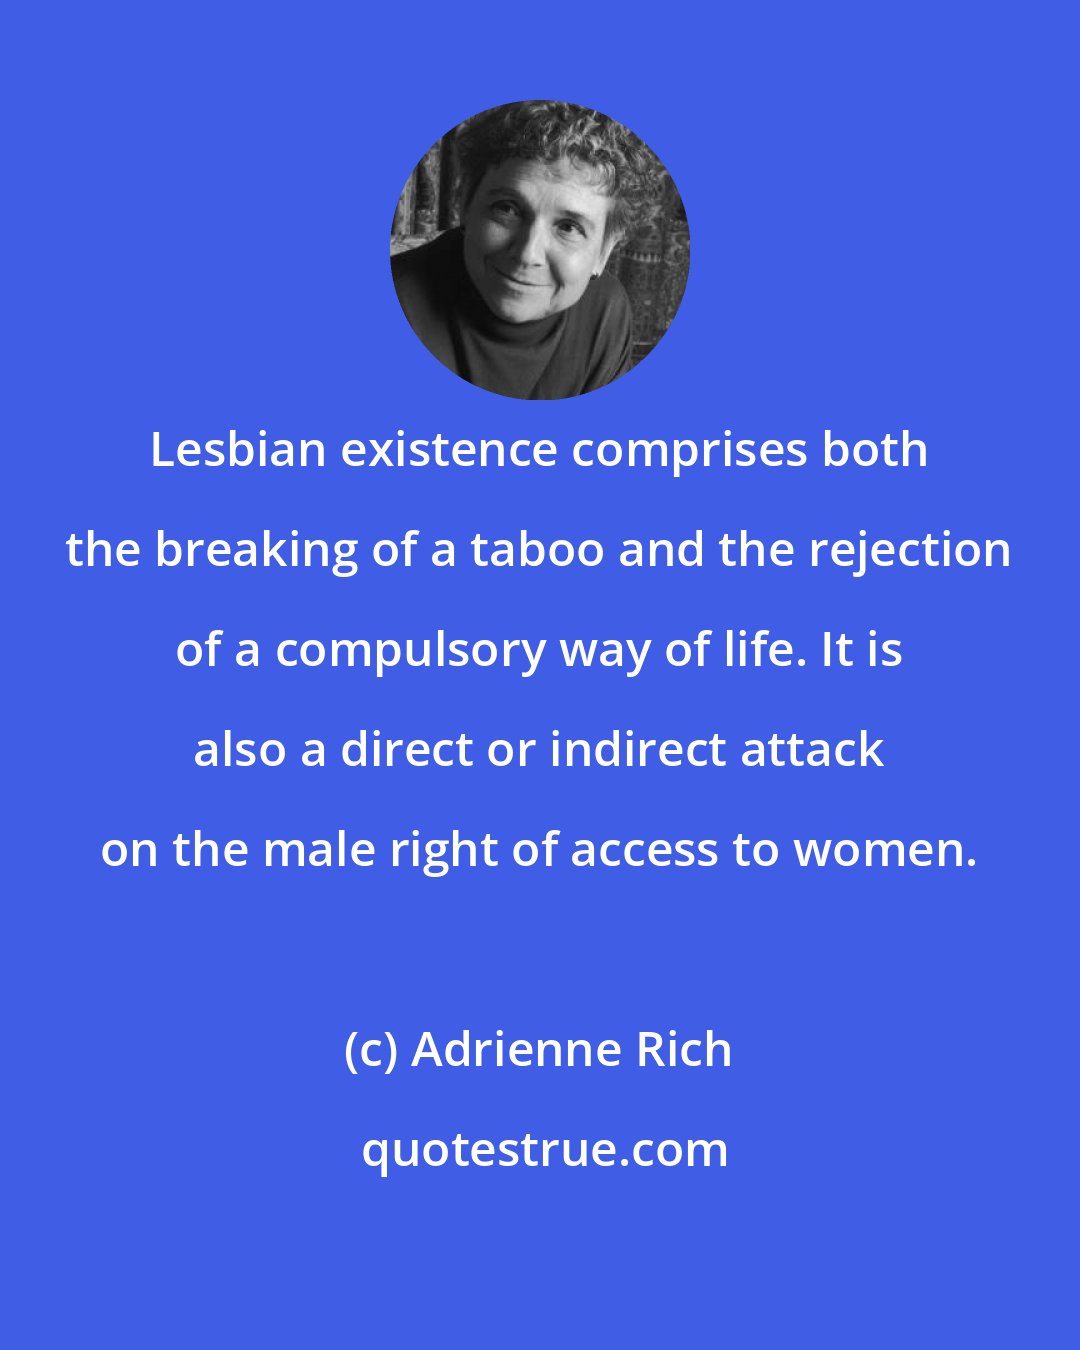 Adrienne Rich: Lesbian existence comprises both the breaking of a taboo and the rejection of a compulsory way of life. It is also a direct or indirect attack on the male right of access to women.